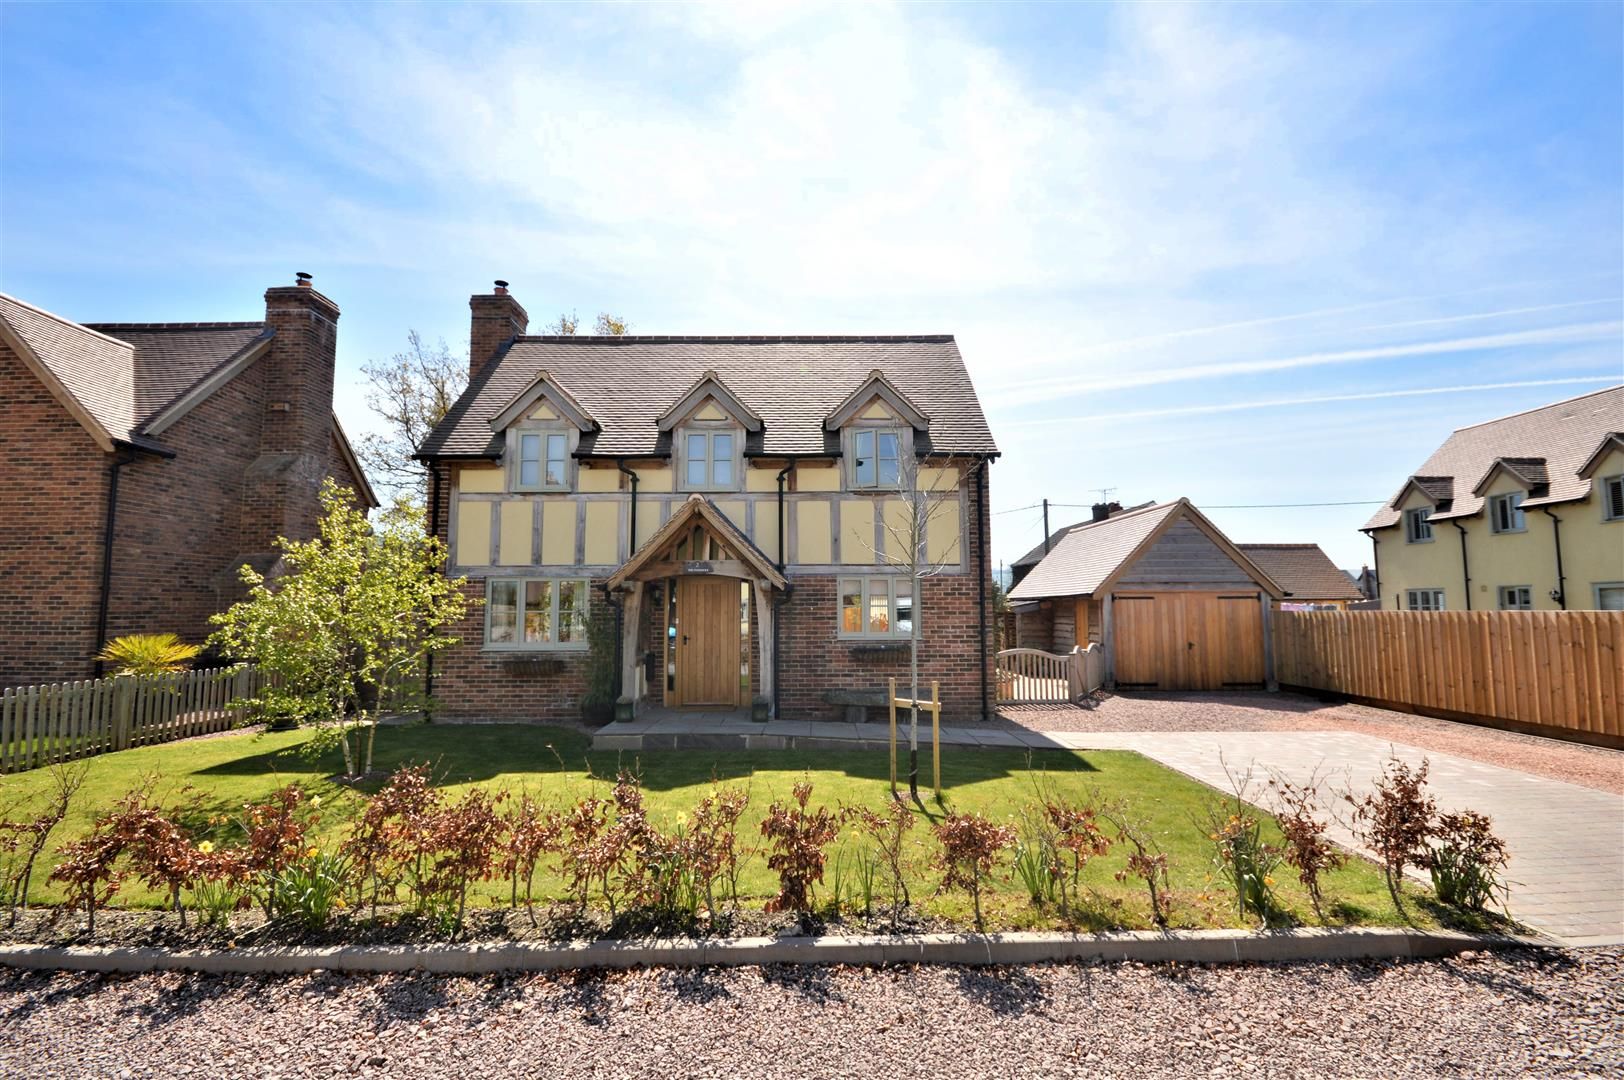 3 bed detached for sale in Winforton 3